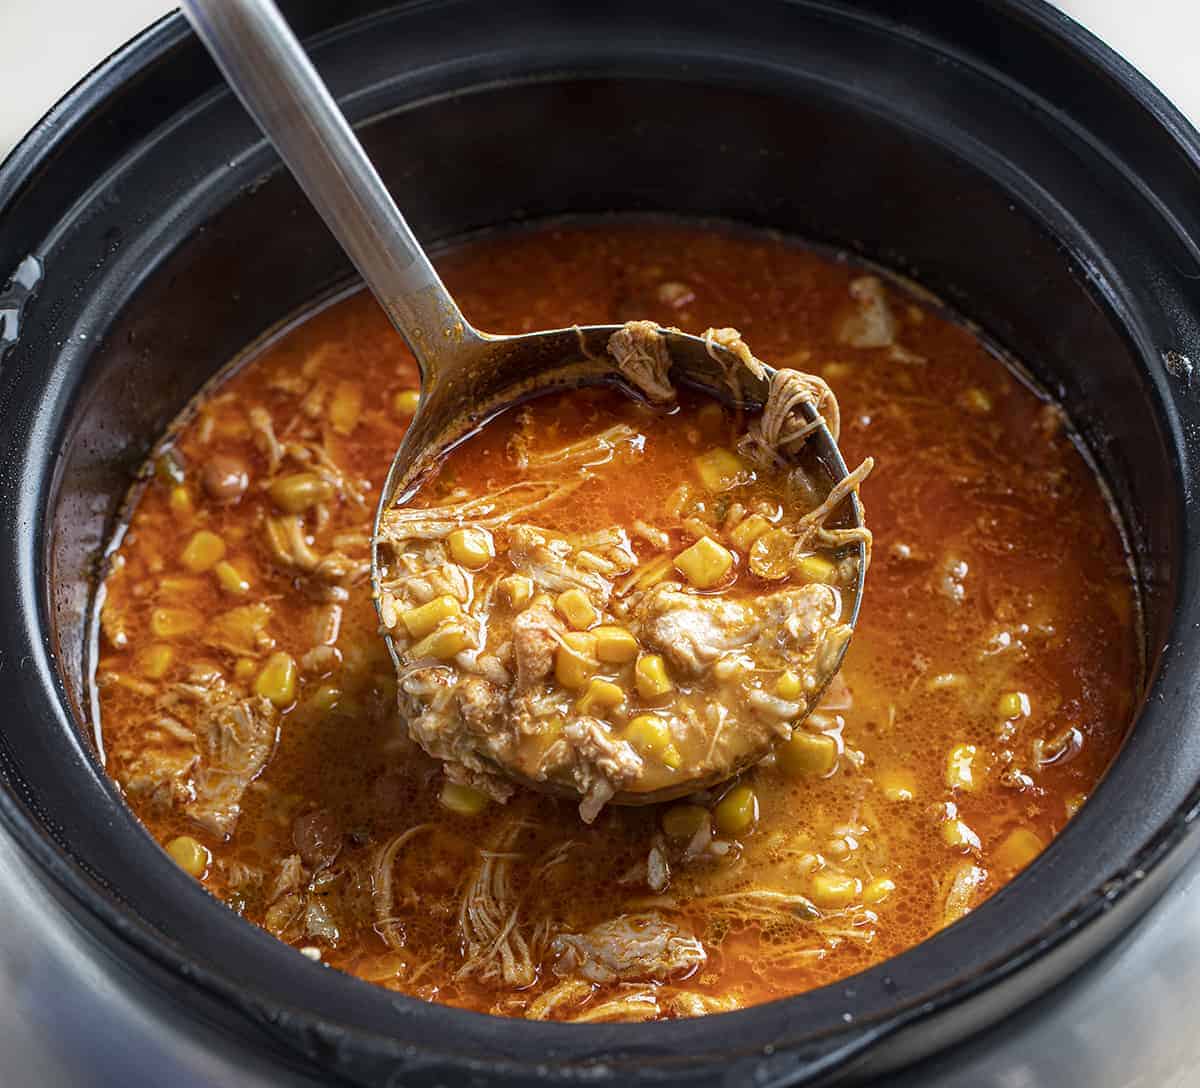 Ladle full of Spicy Chipotle Chicken Soup in a Crockpot